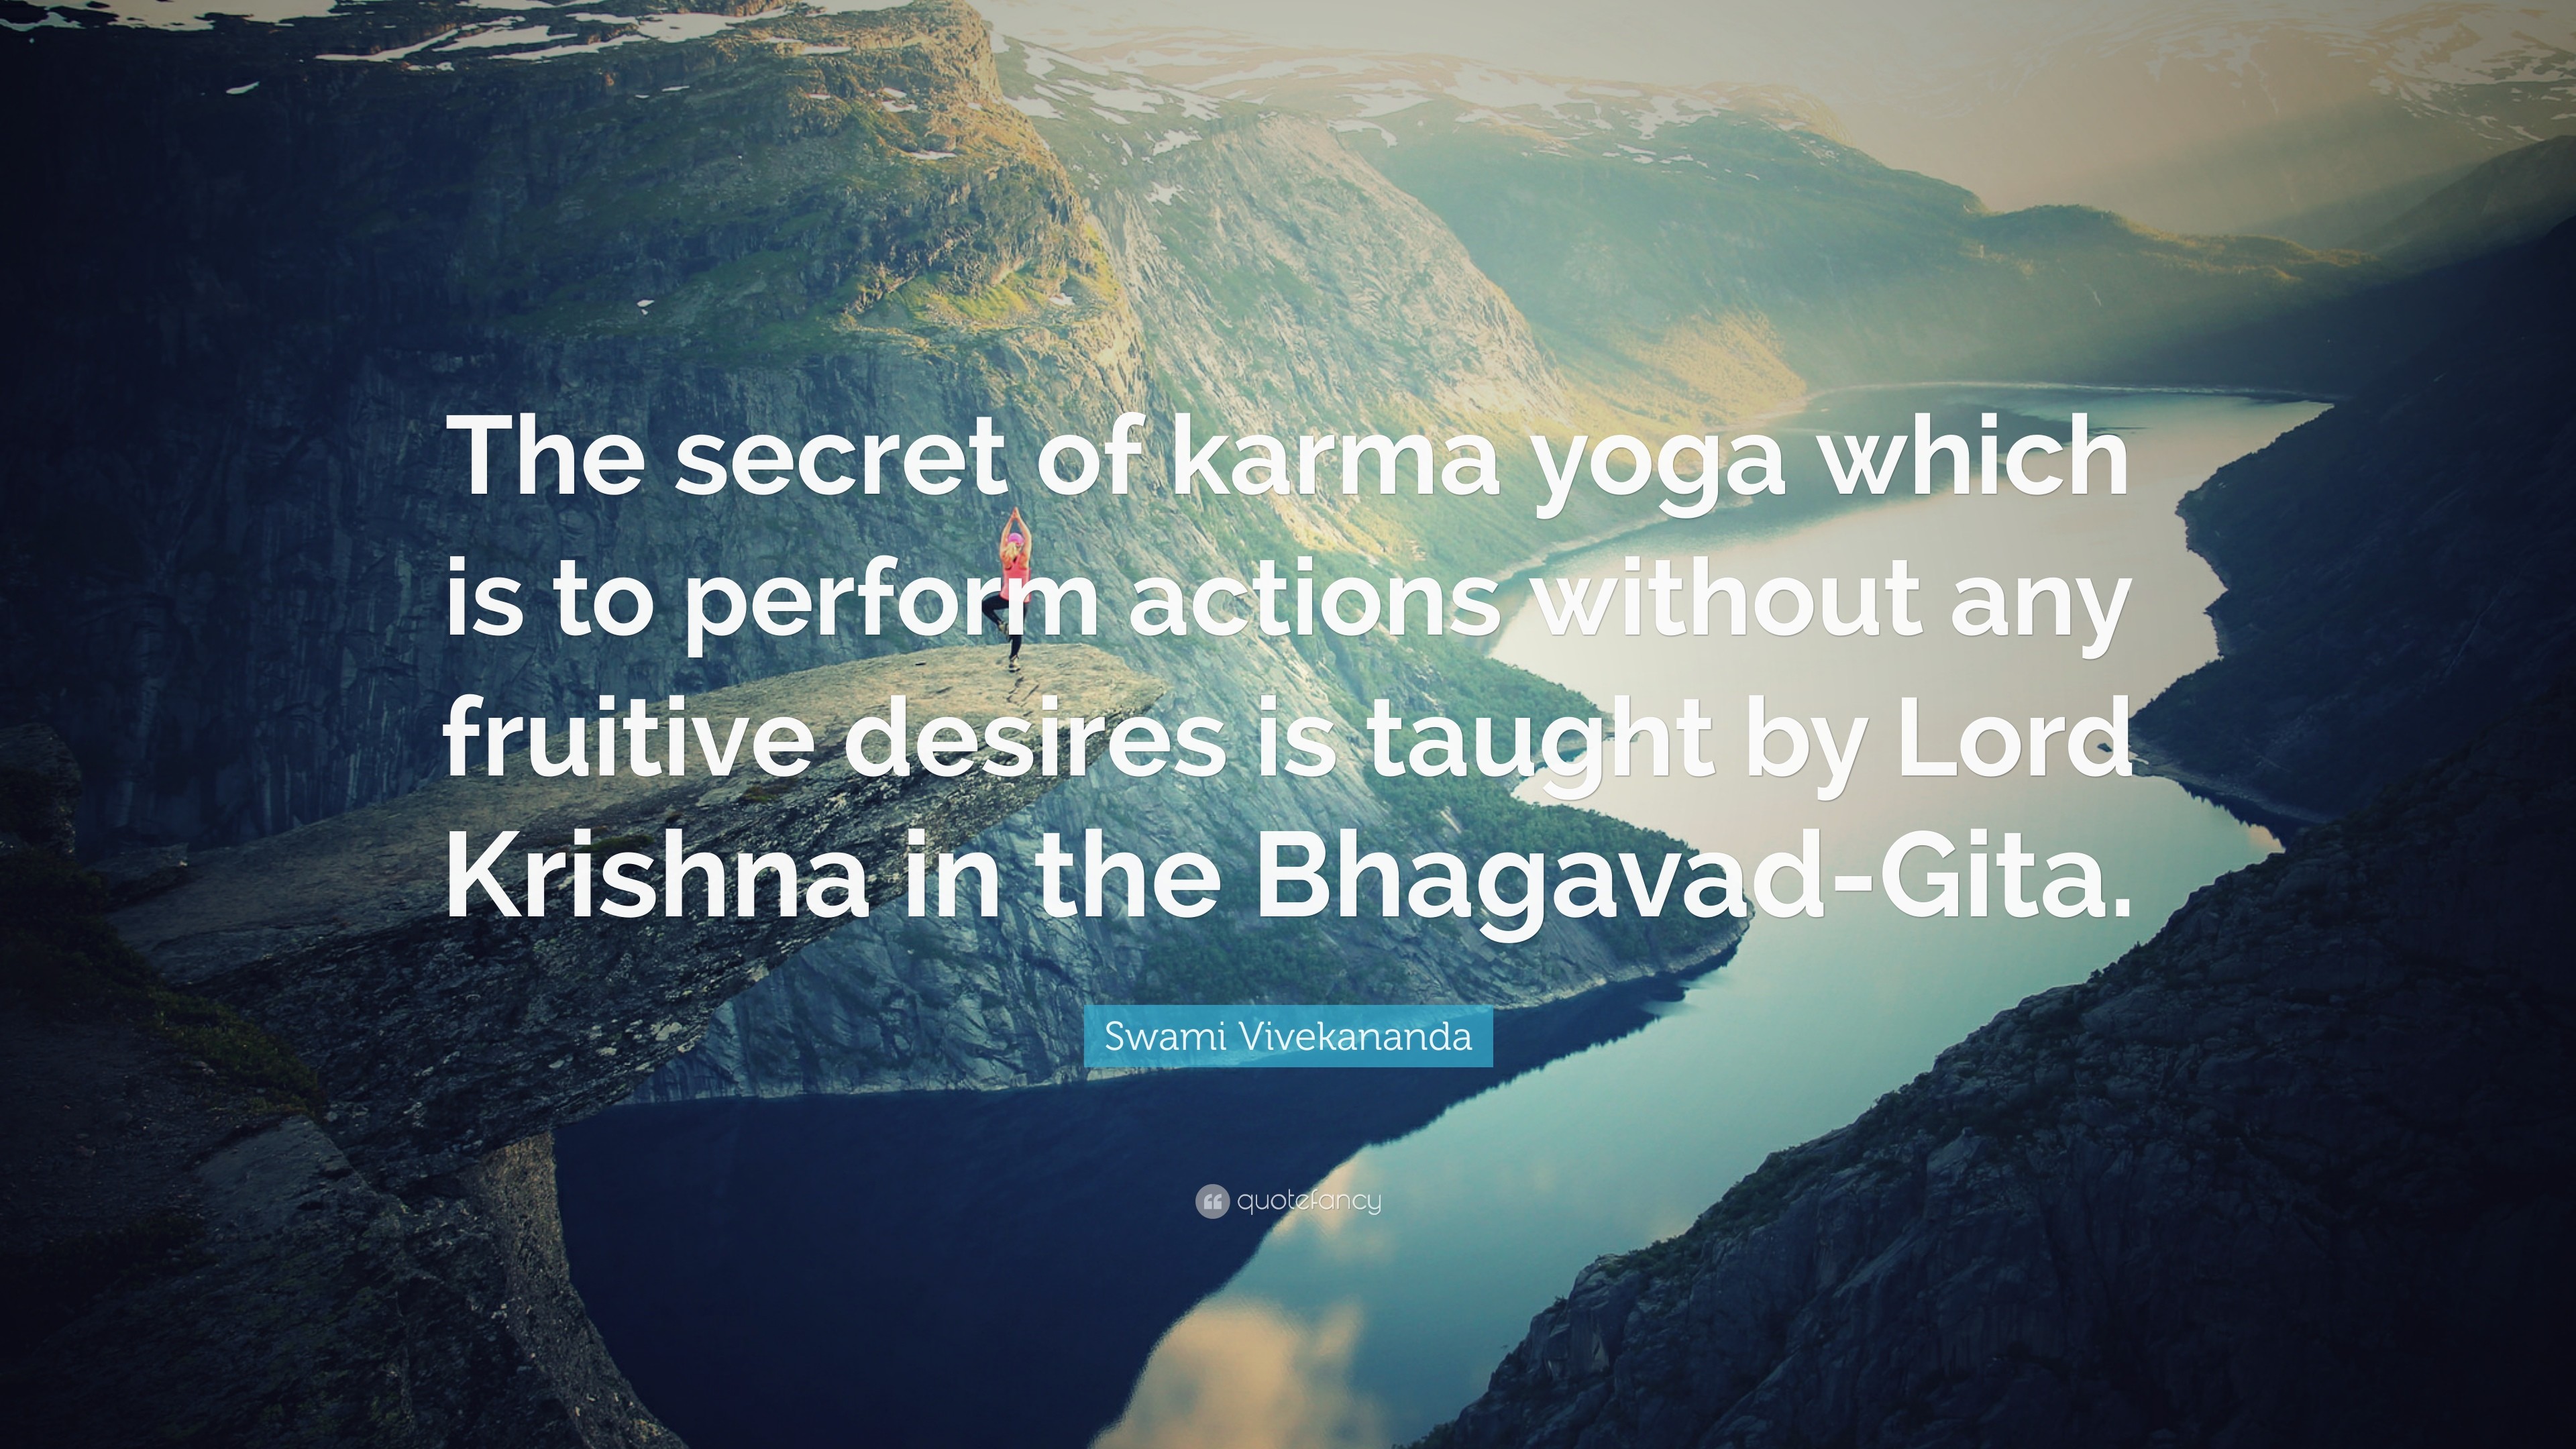 3840x2160 Swami Vivekananda Quote: “The secret of karma yoga which is to perform  actions without